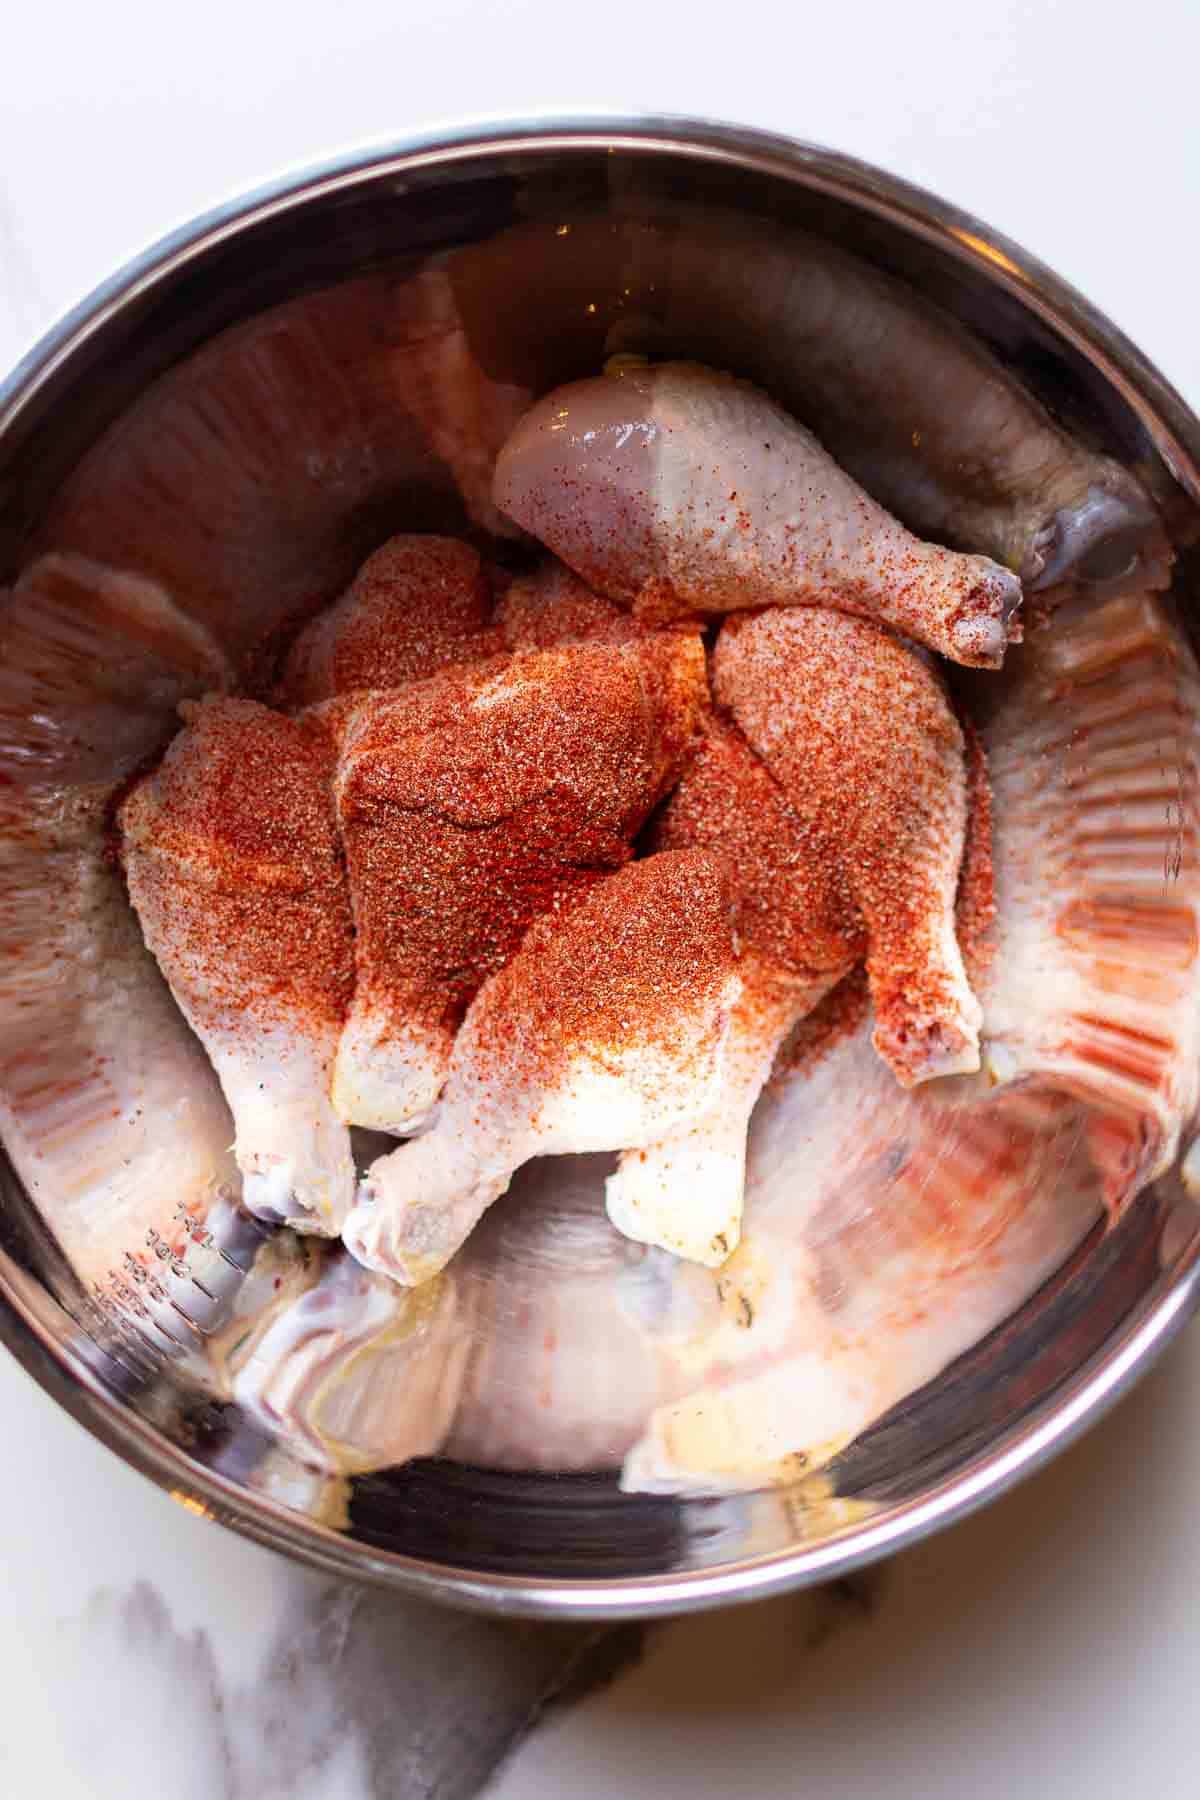 The chicken legs covered in the dry rub seasoning